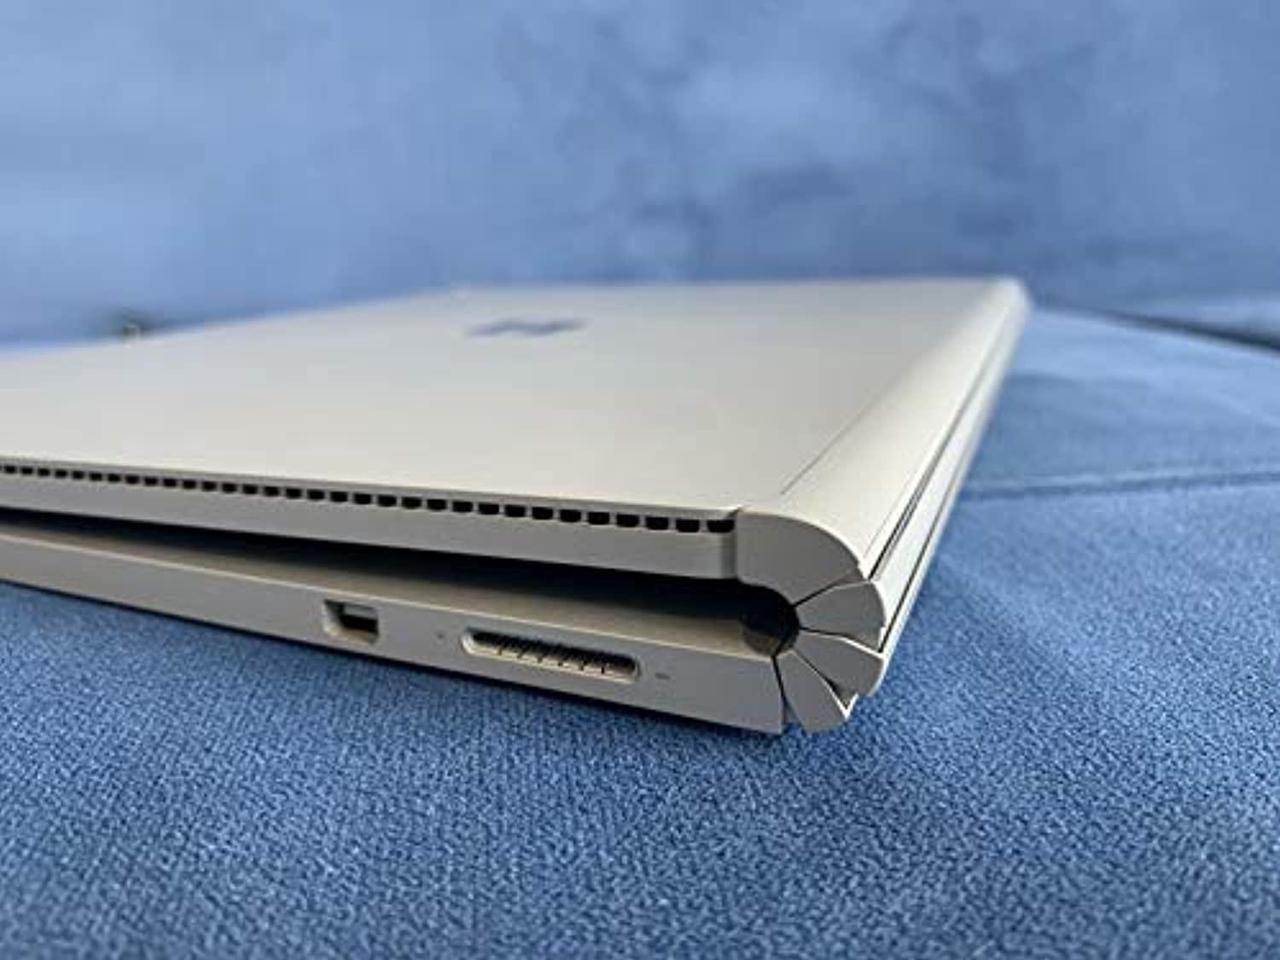 Microsoft Surface Book 512GB with Performance Base (13.5 Inch 